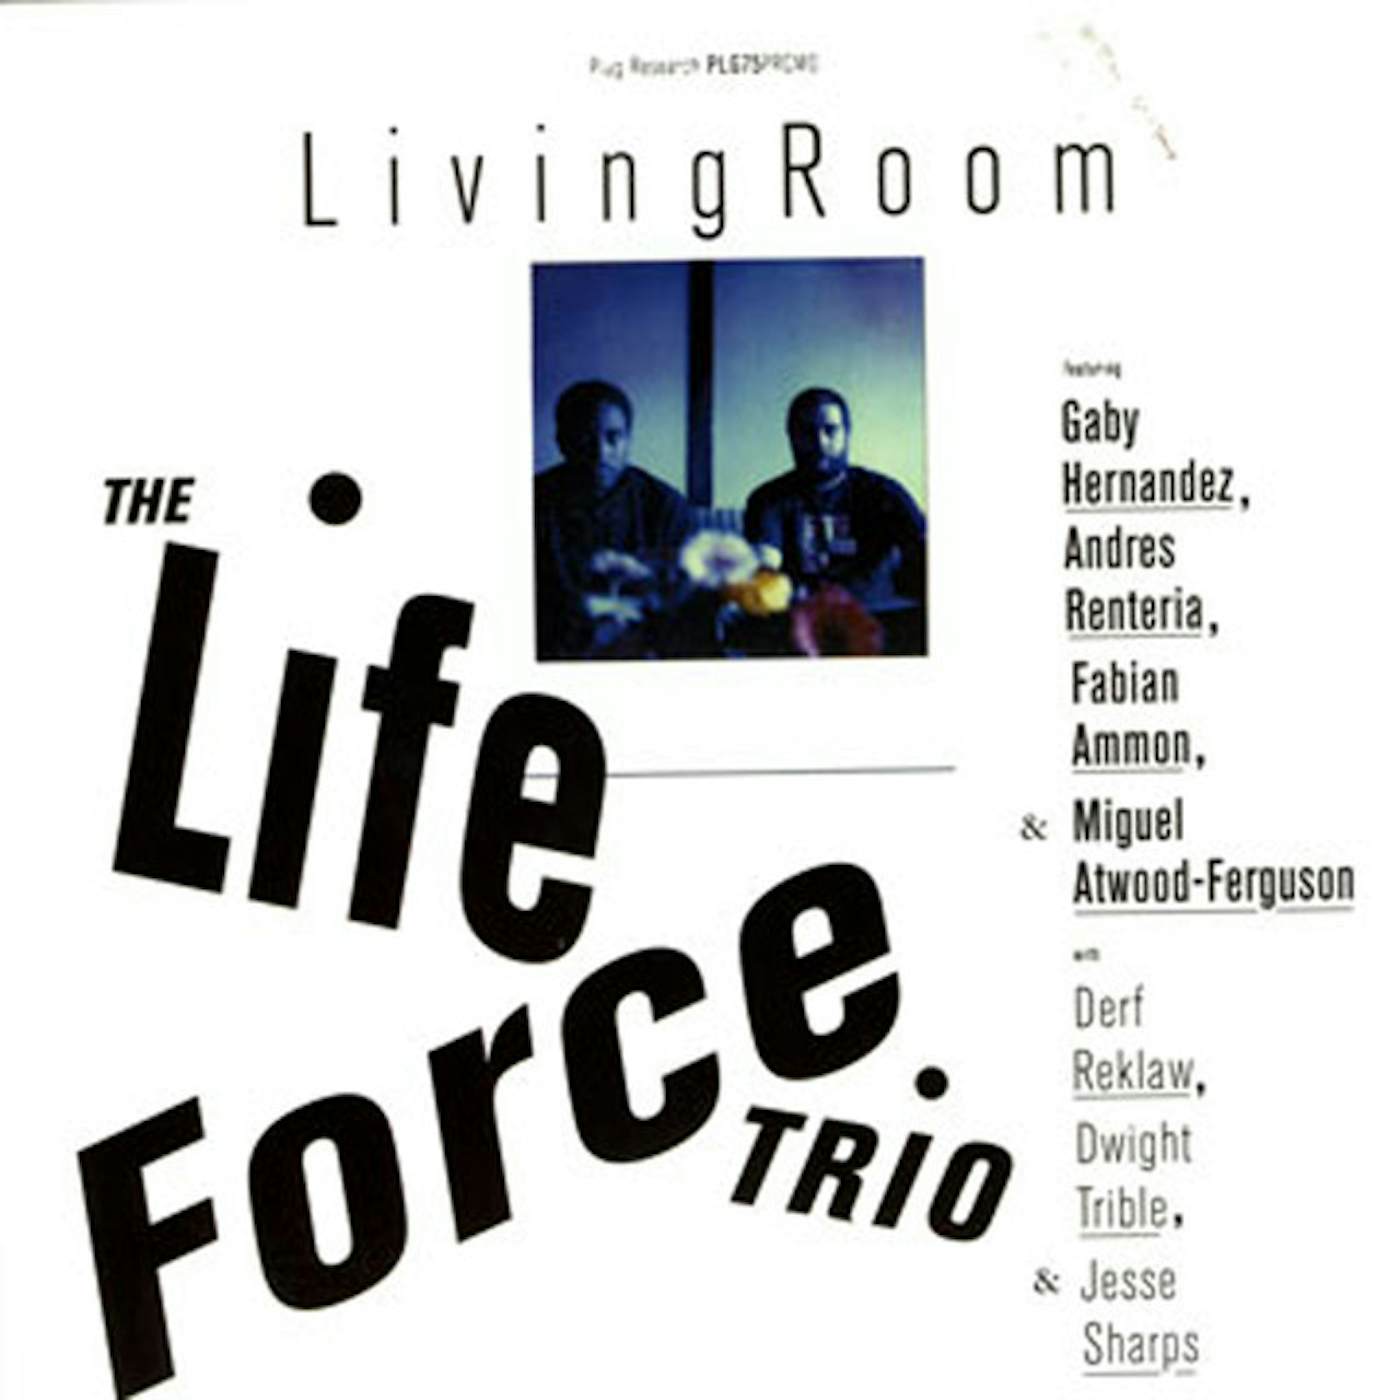 The Life Force Trio Living Room Vinyl Record